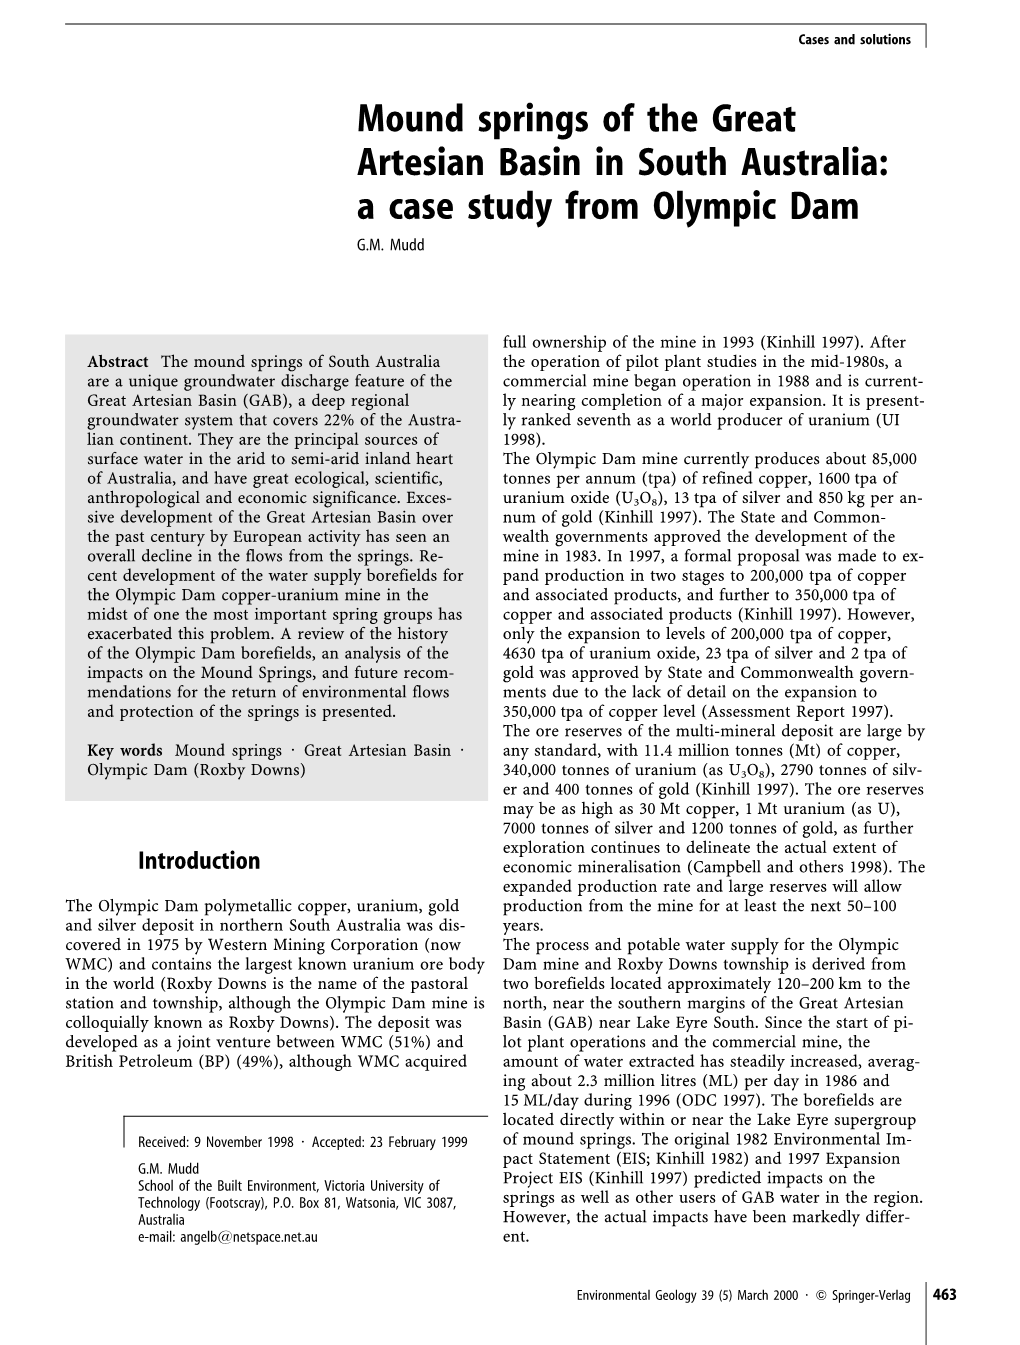 Mound Springs of the Great Artesian Basin in South Australia: a Case Study from Olympic Dam G.M